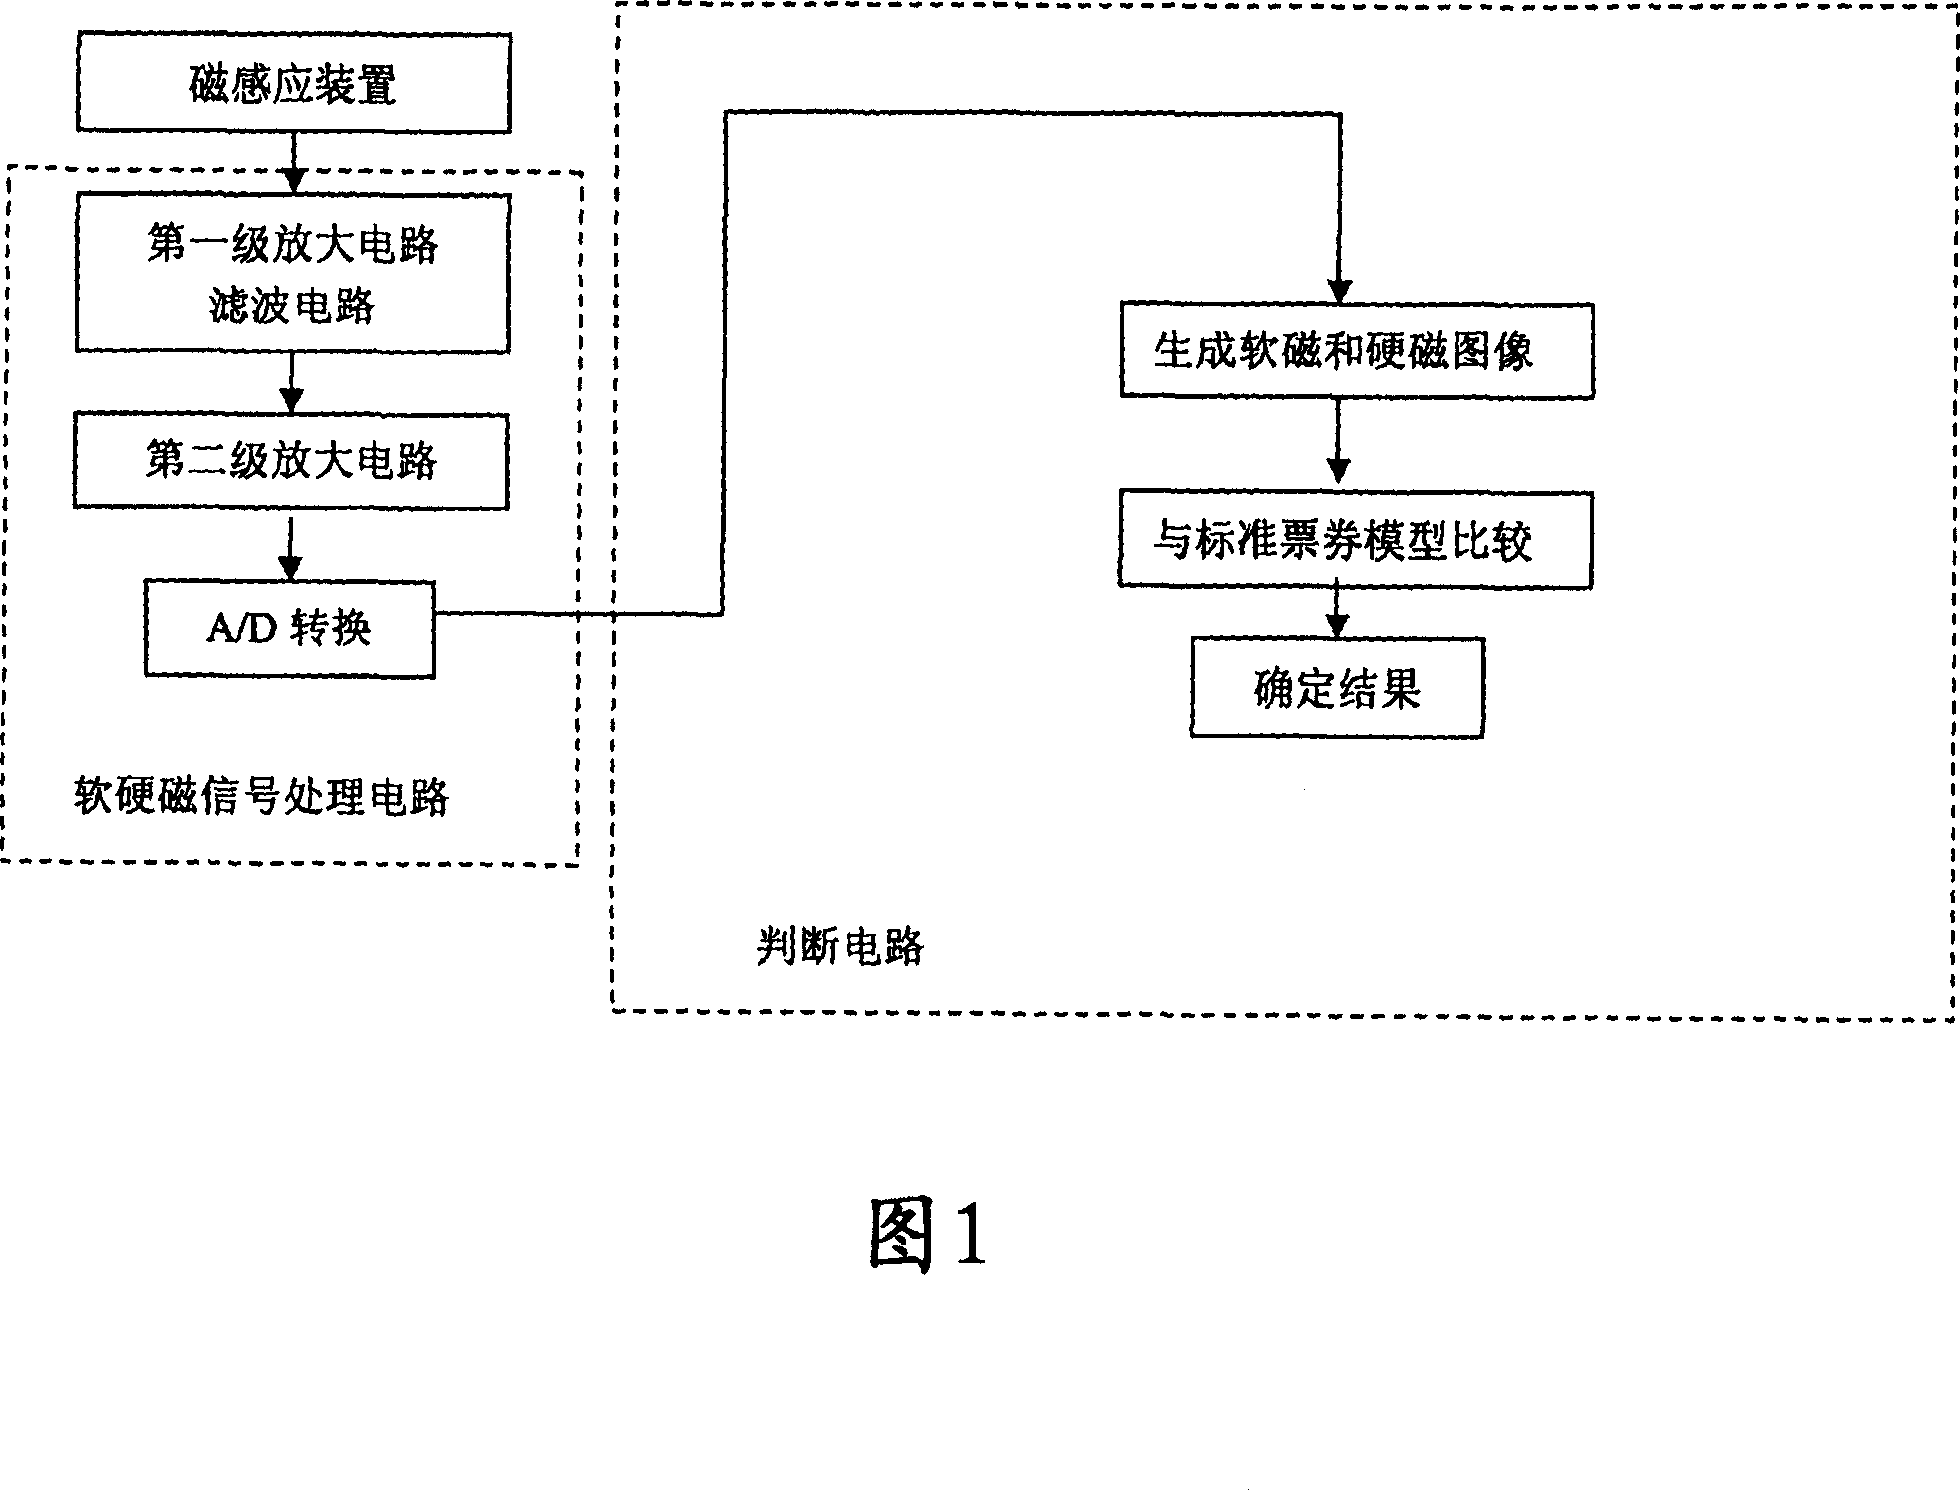 Magnetic induction device, and finance bills detection system of using the device